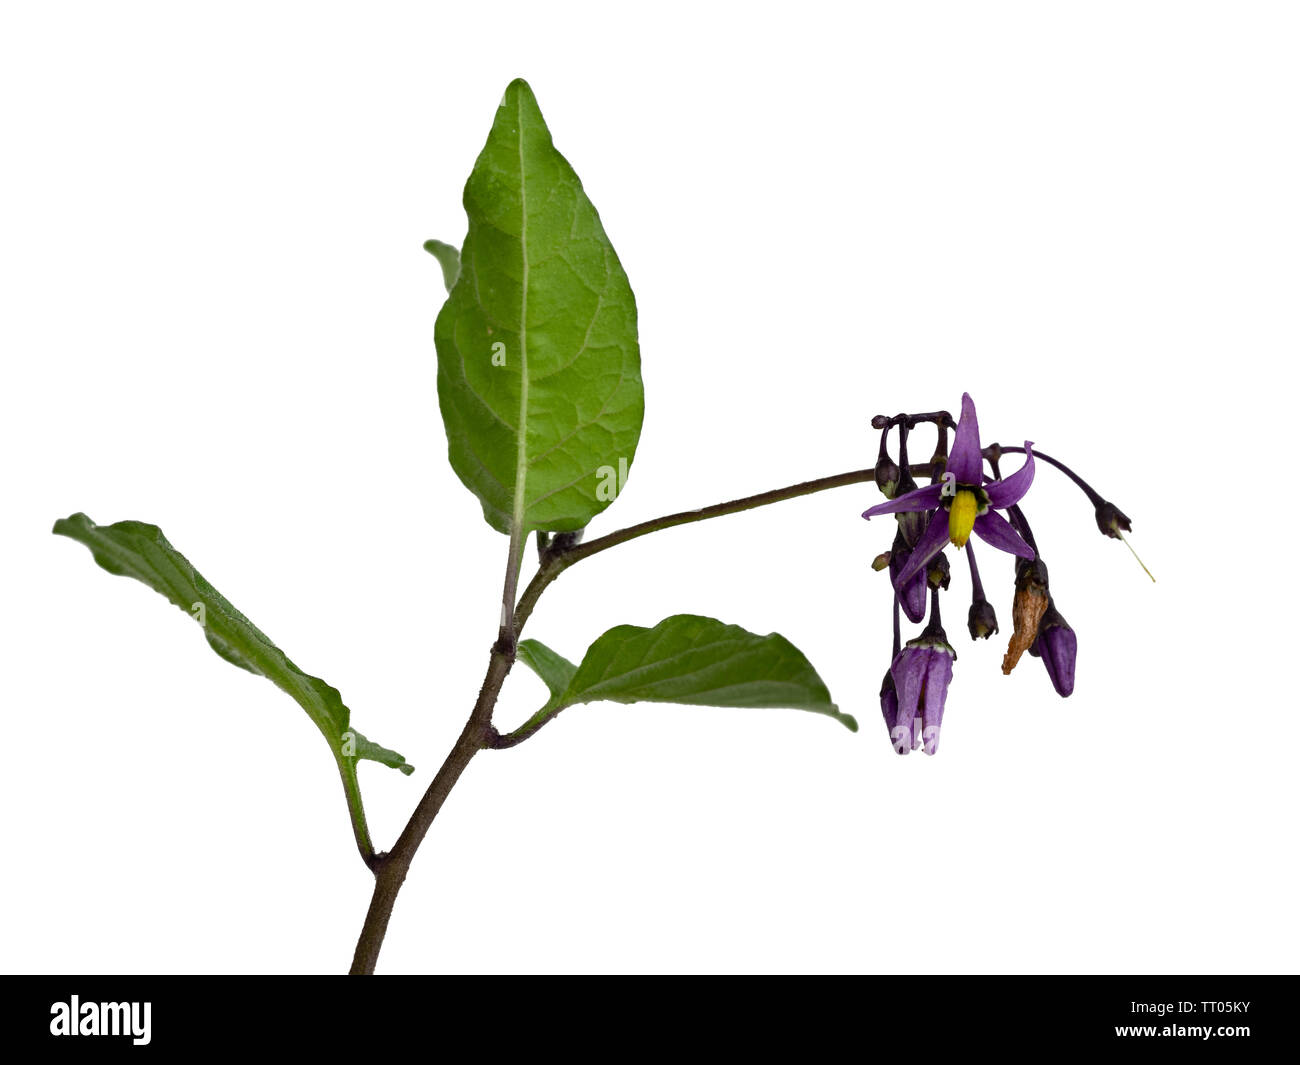 Annual foliage and purple flowers of Solanum dulcamara, woody nightshade, a toxic herbaceous perennial scrambler on a white background Stock Photo